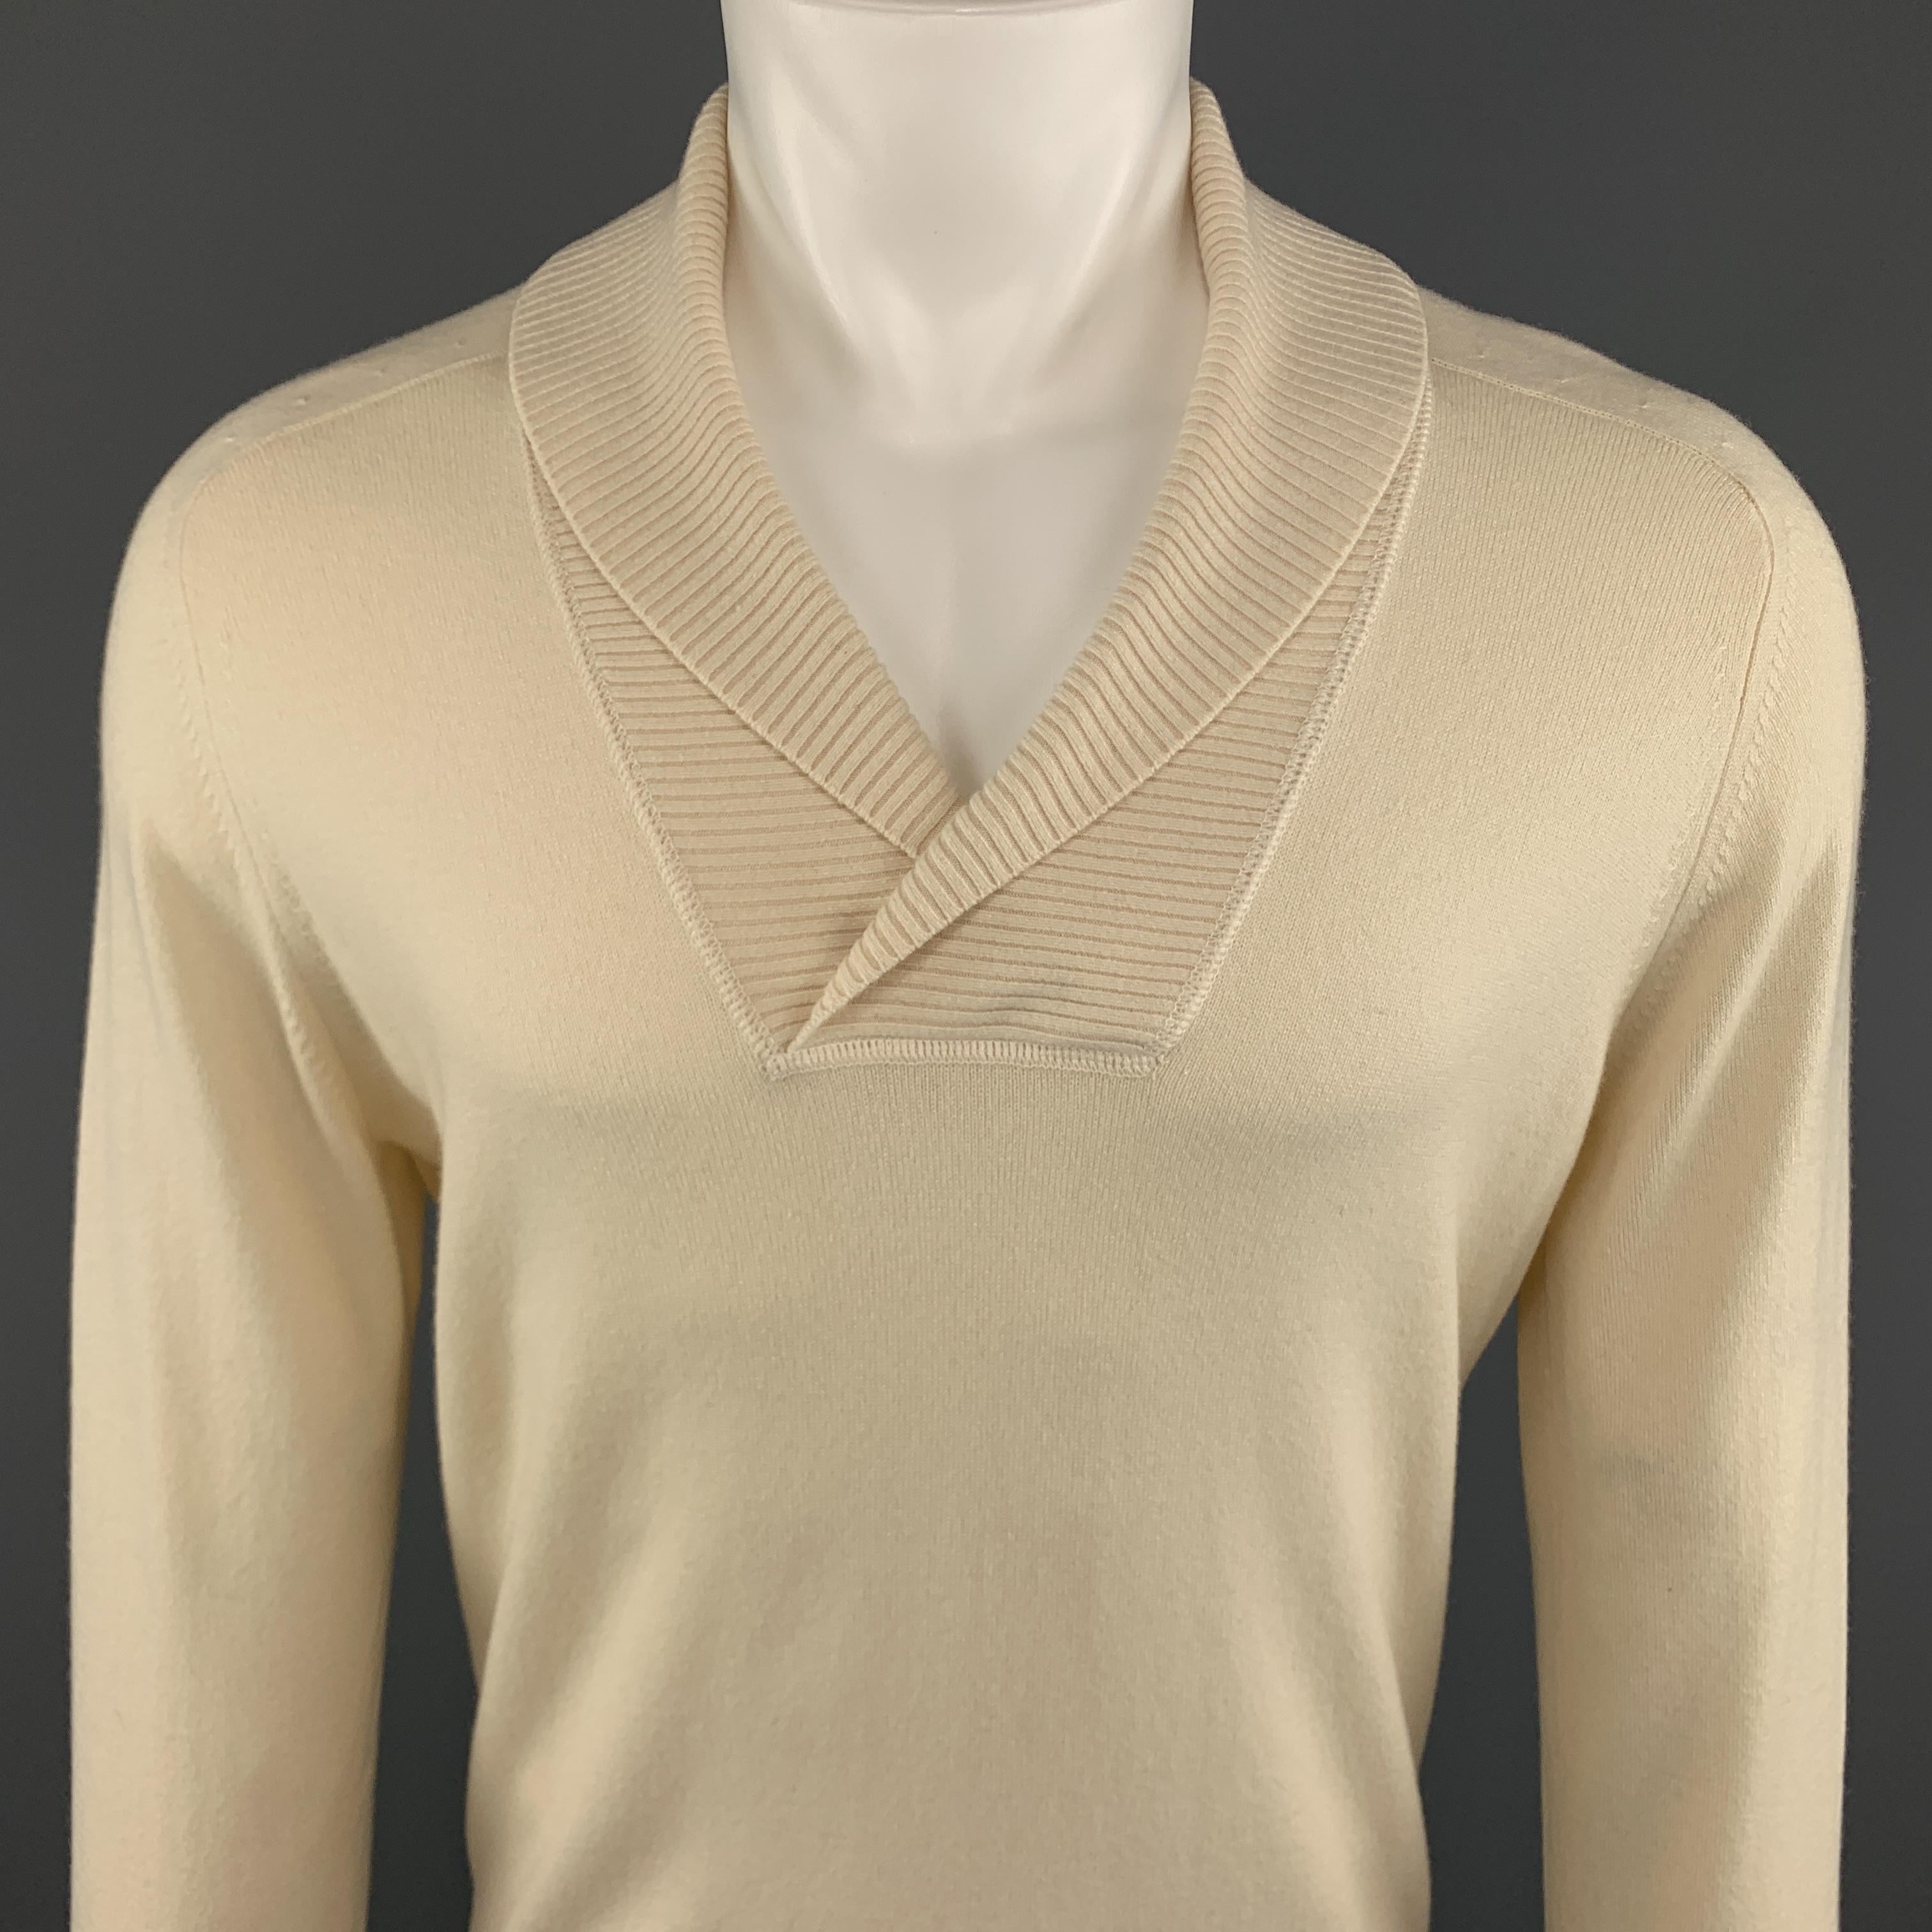 BRUNELLO CUCINELLI Pullover Sweater comes in a cream tone in a solid cashmere material, with a shawl collar, raglan long sleeves and ribbed cuffs and hem. Made in Italy.
 
New With Tags.
Marked: IT 50
 
Measurements:
 
Shoulder: 17.5 in.
Chest: 42